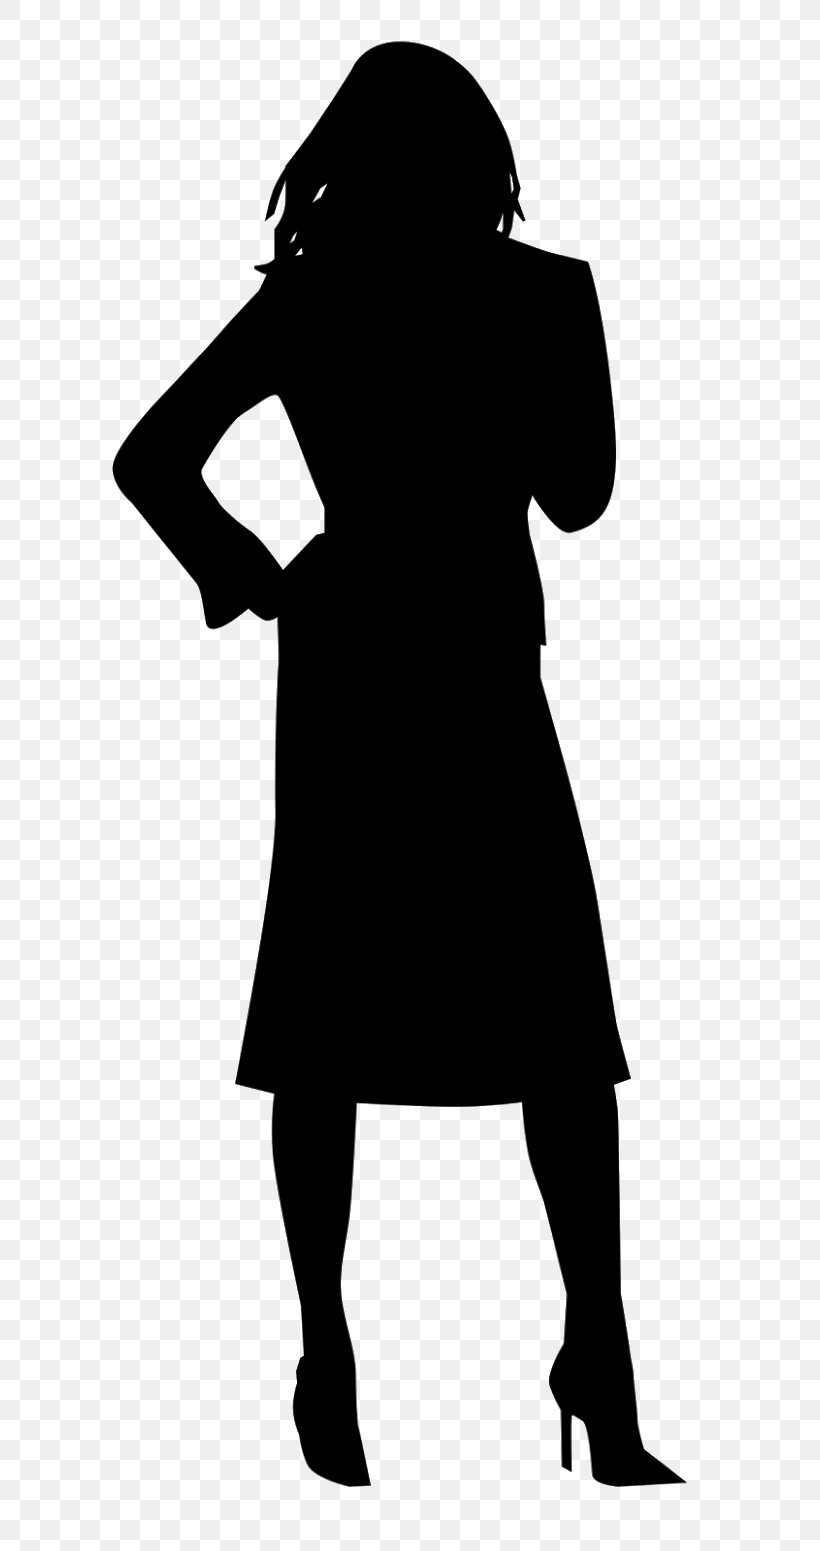 Silhouette Clip Art, PNG, 660x1551px, Silhouette, Art, Black, Black And ...